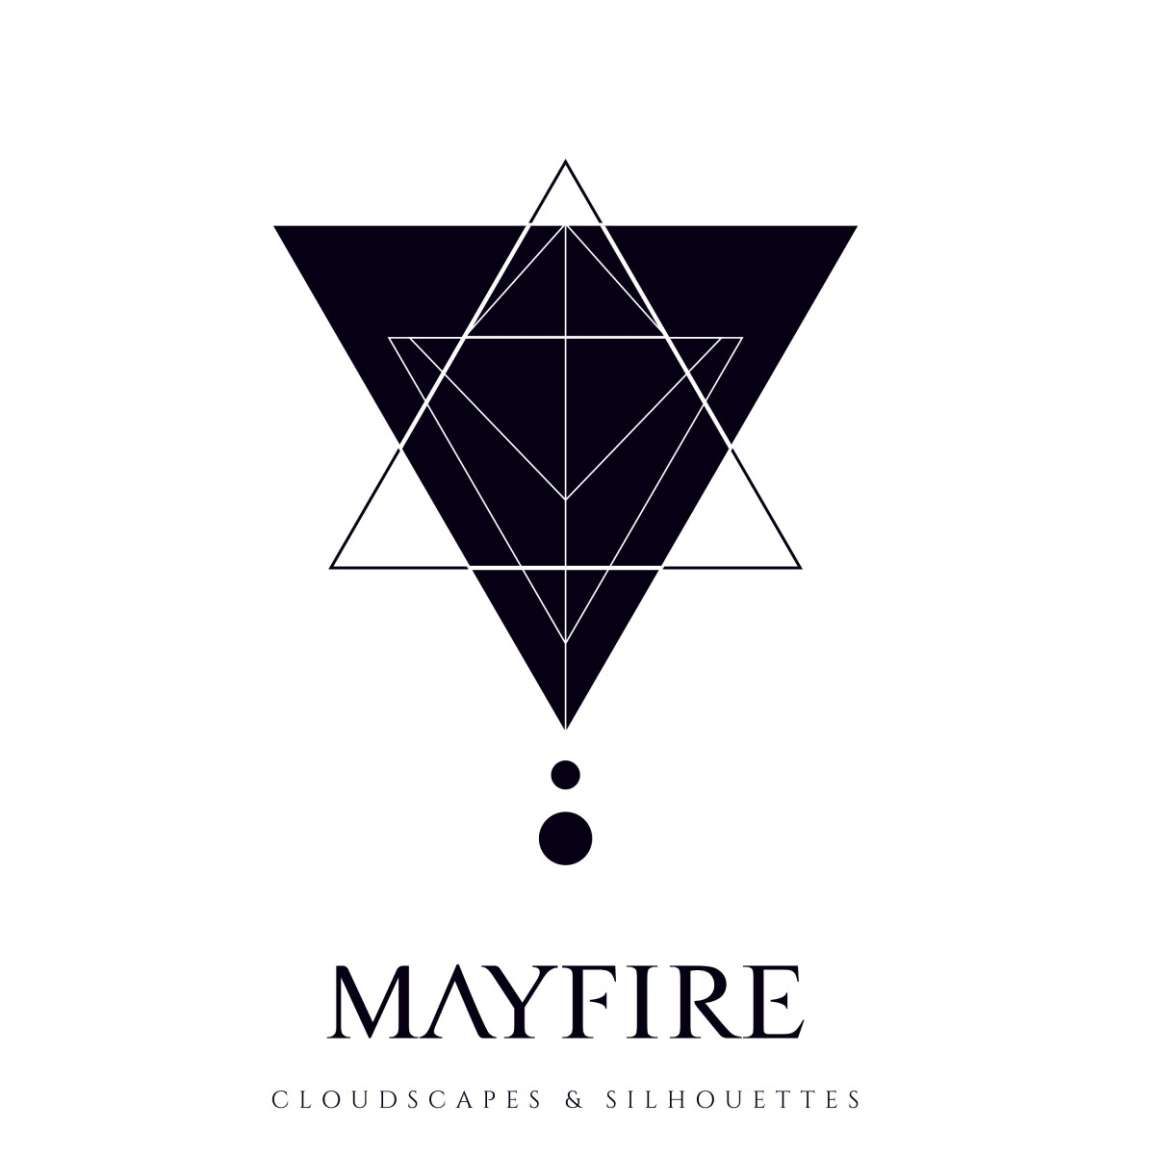 Mayfire - Cloudscapes And Silhouettes